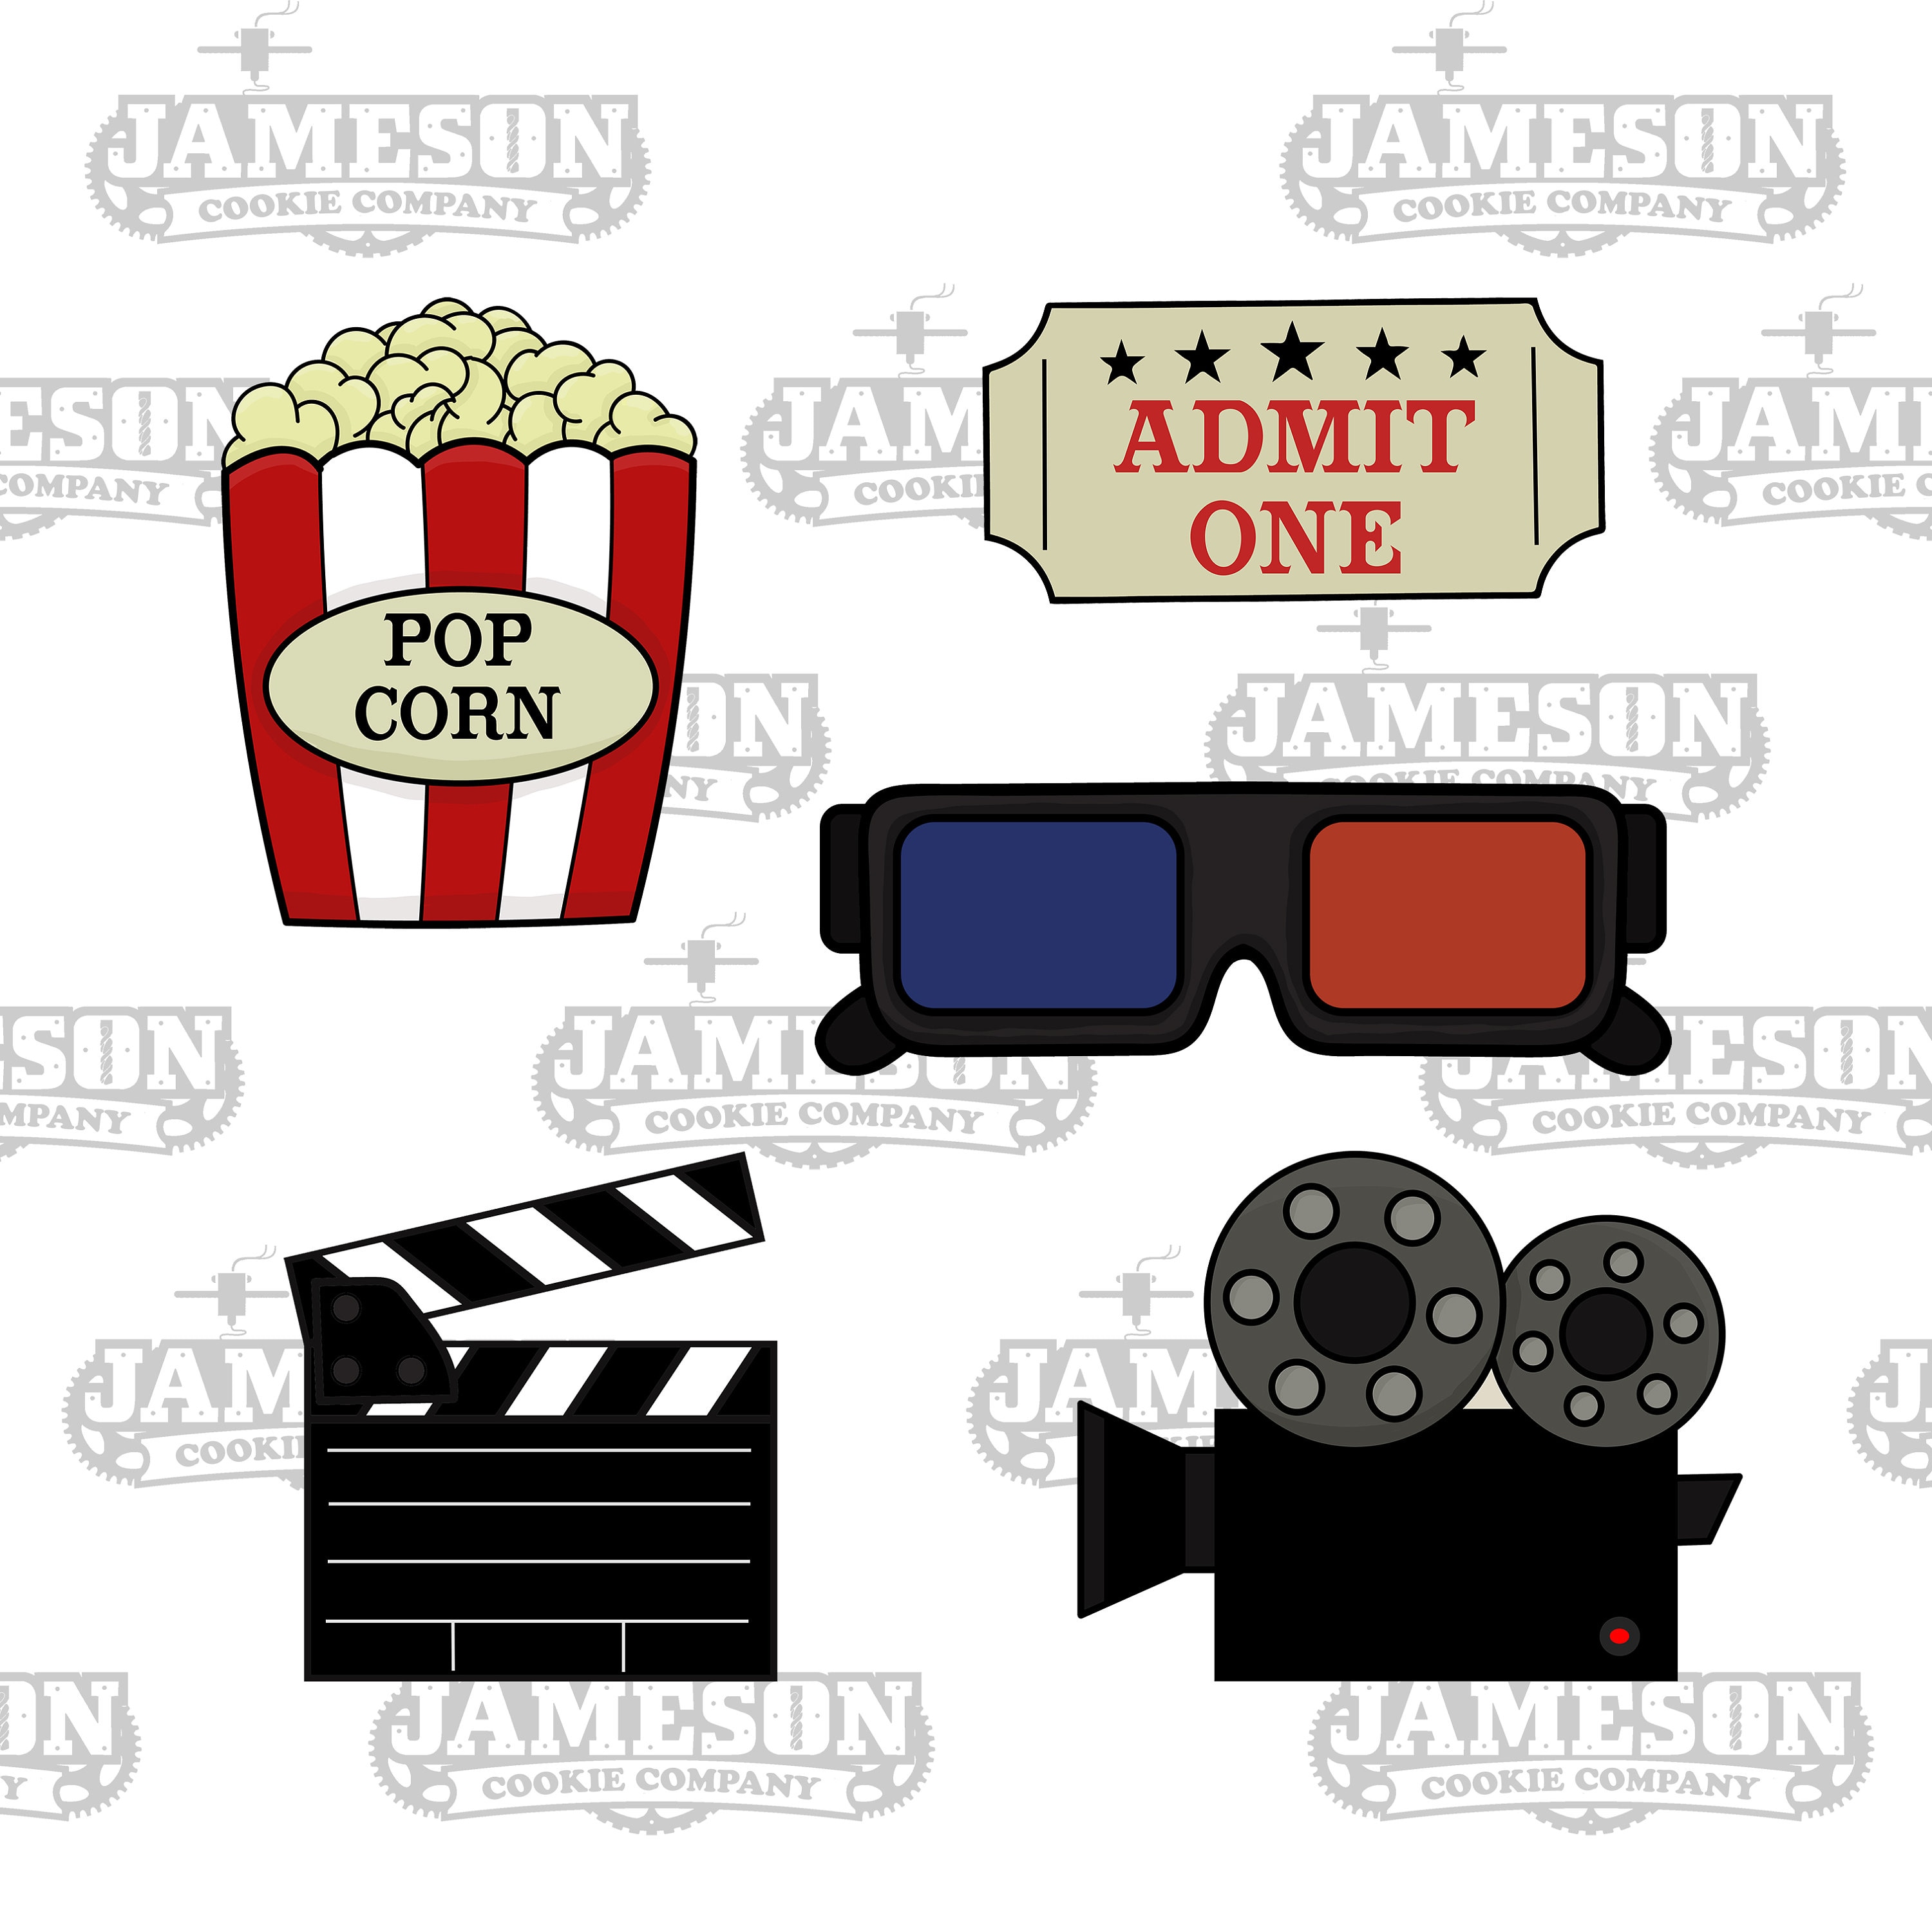 Acrylic Display for Stickers, Sticker Display, Floating Frame Display,  Sticker Collection, Stamp Collection Frame, Ticket Stub Display 